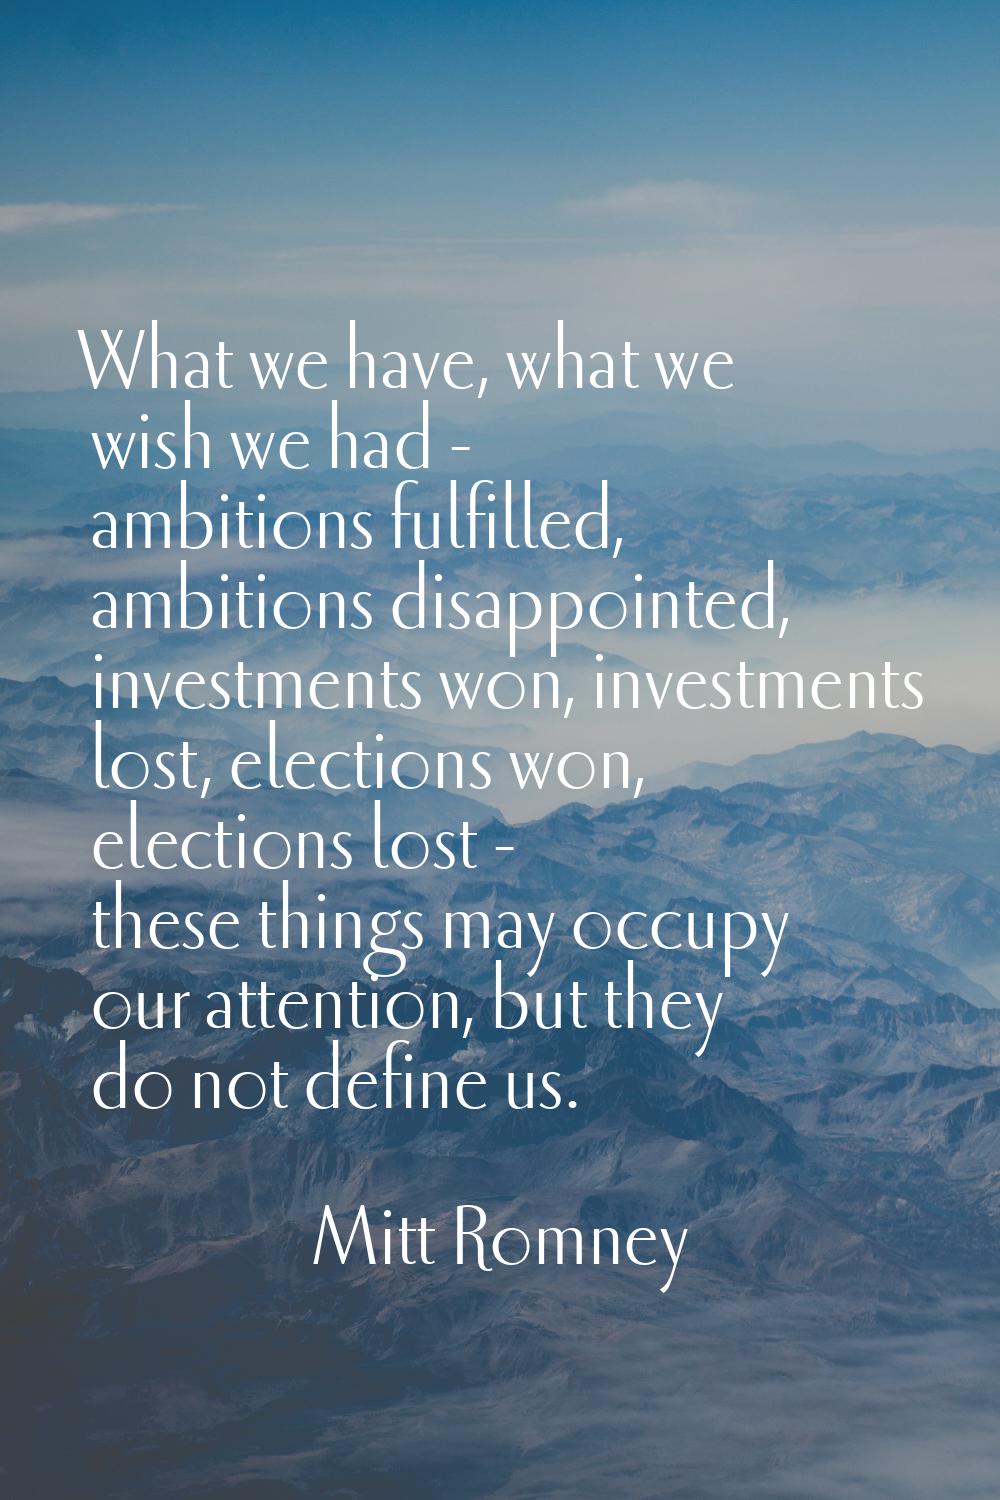 What we have, what we wish we had - ambitions fulfilled, ambitions disappointed, investments won, i